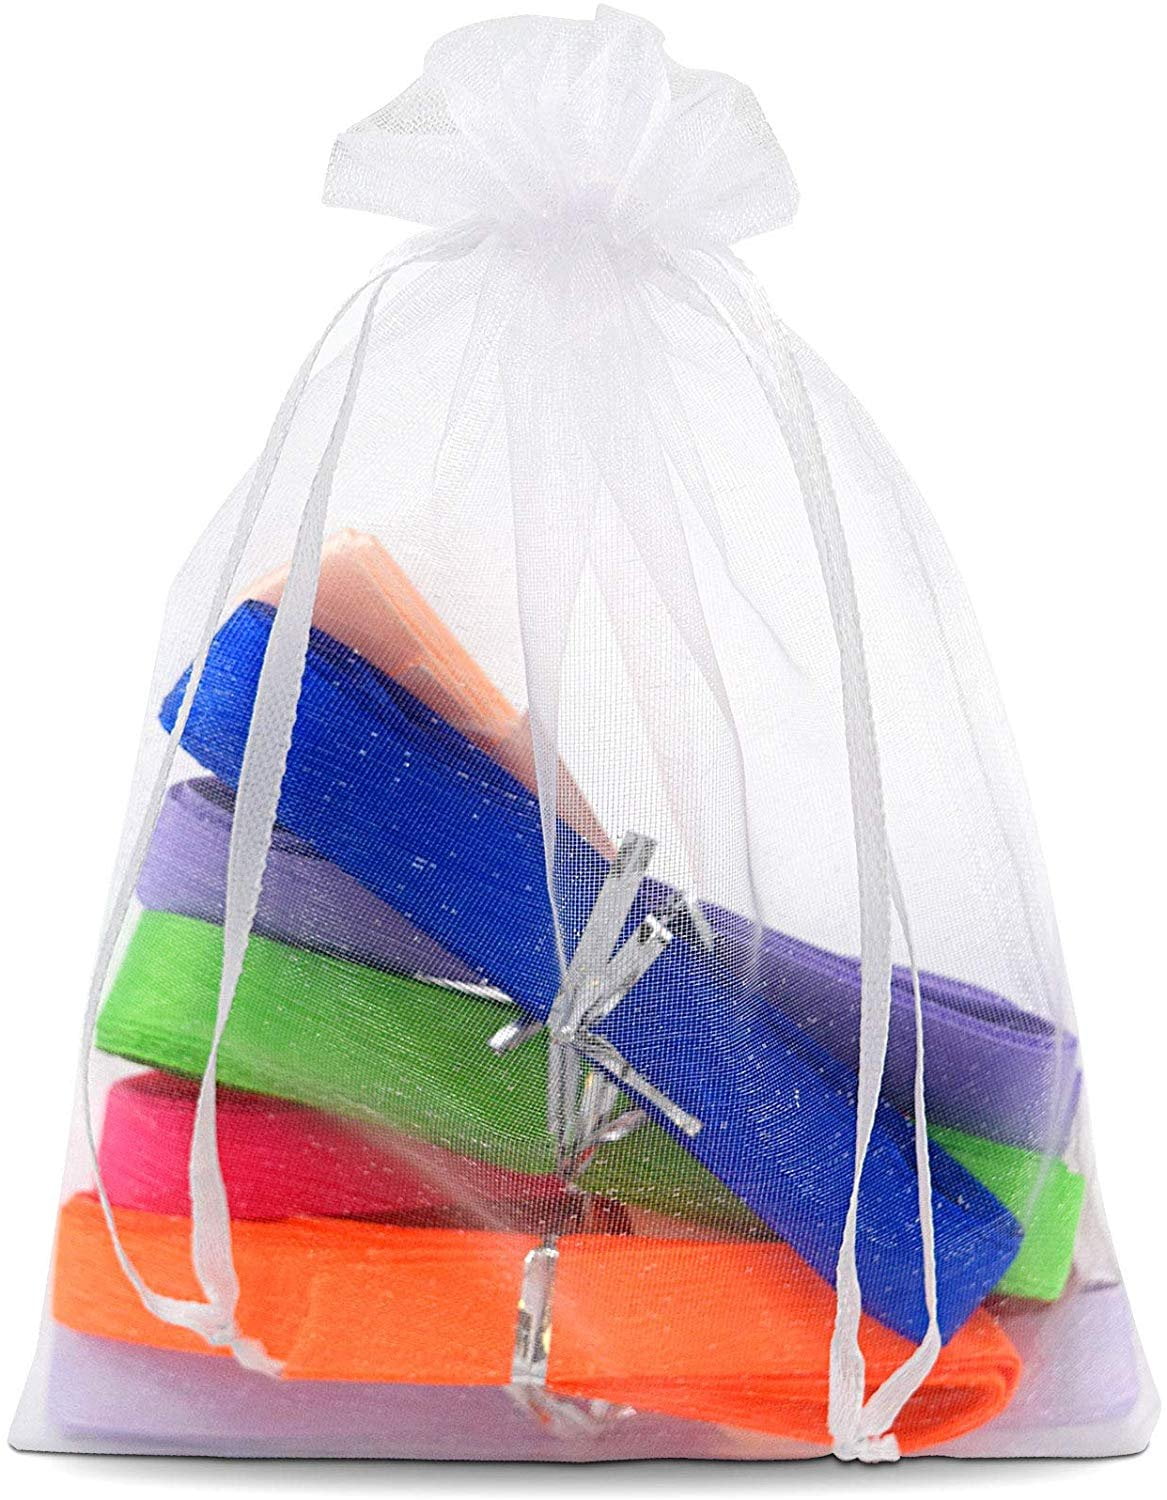 25/50/100pcs Sheer Organza Wedding Party Favor Gift Candy Bags Jewelry Pouches 